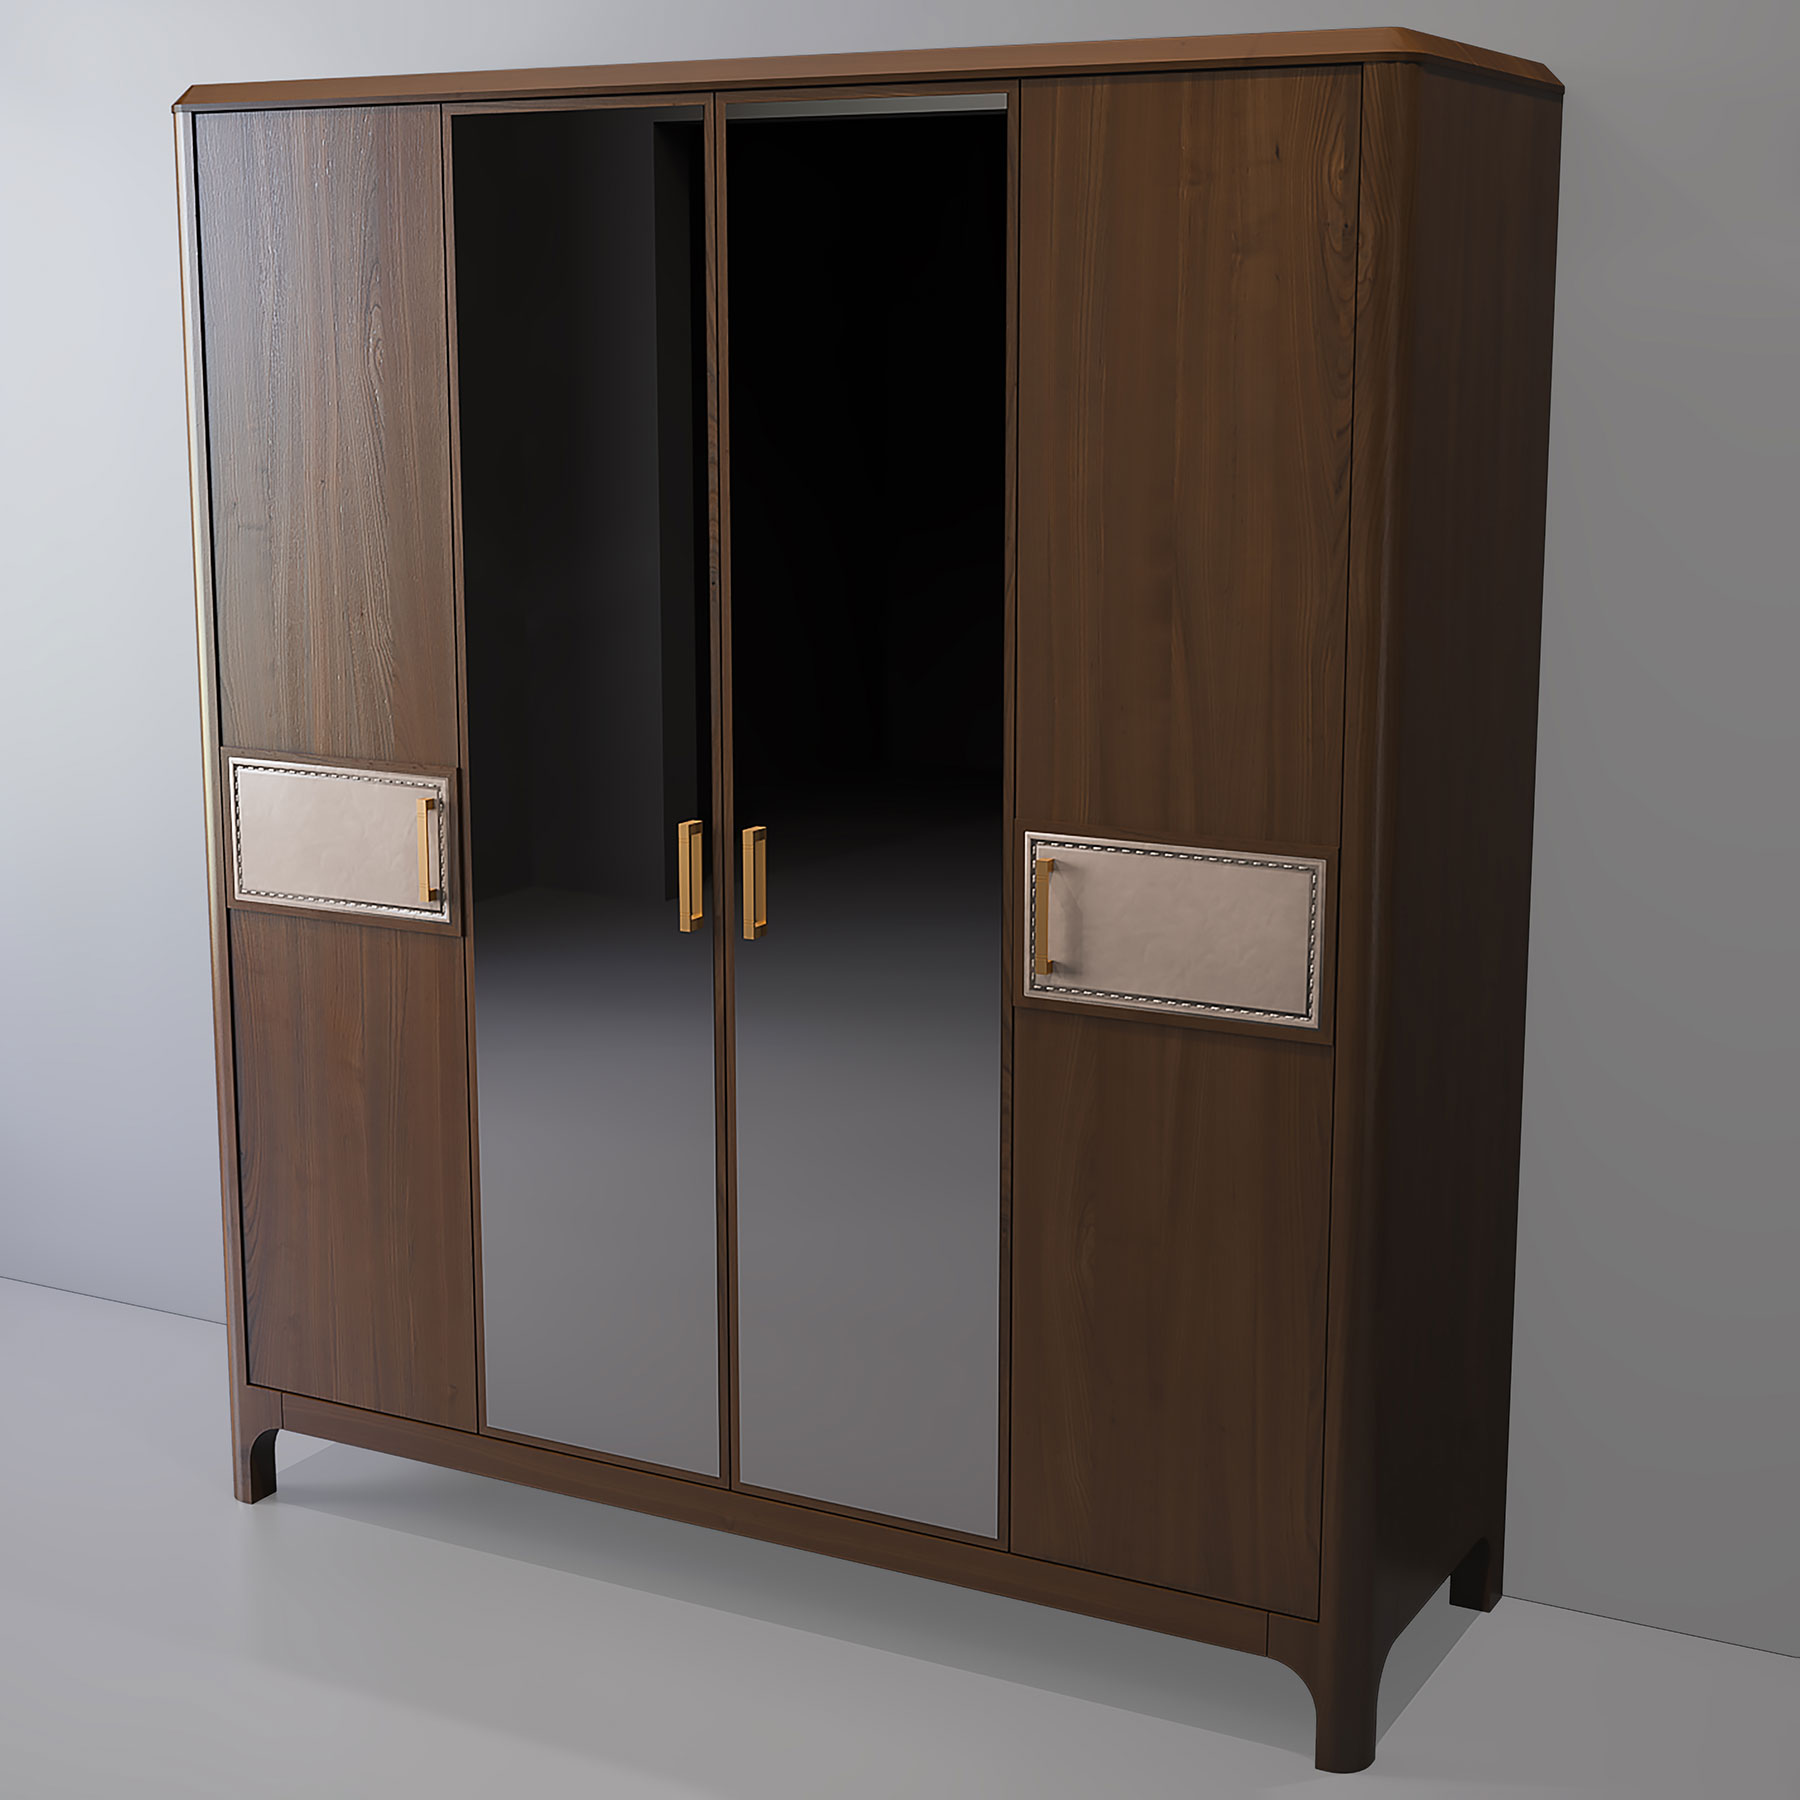 A four-door wardrobe from the Audrey collection 2